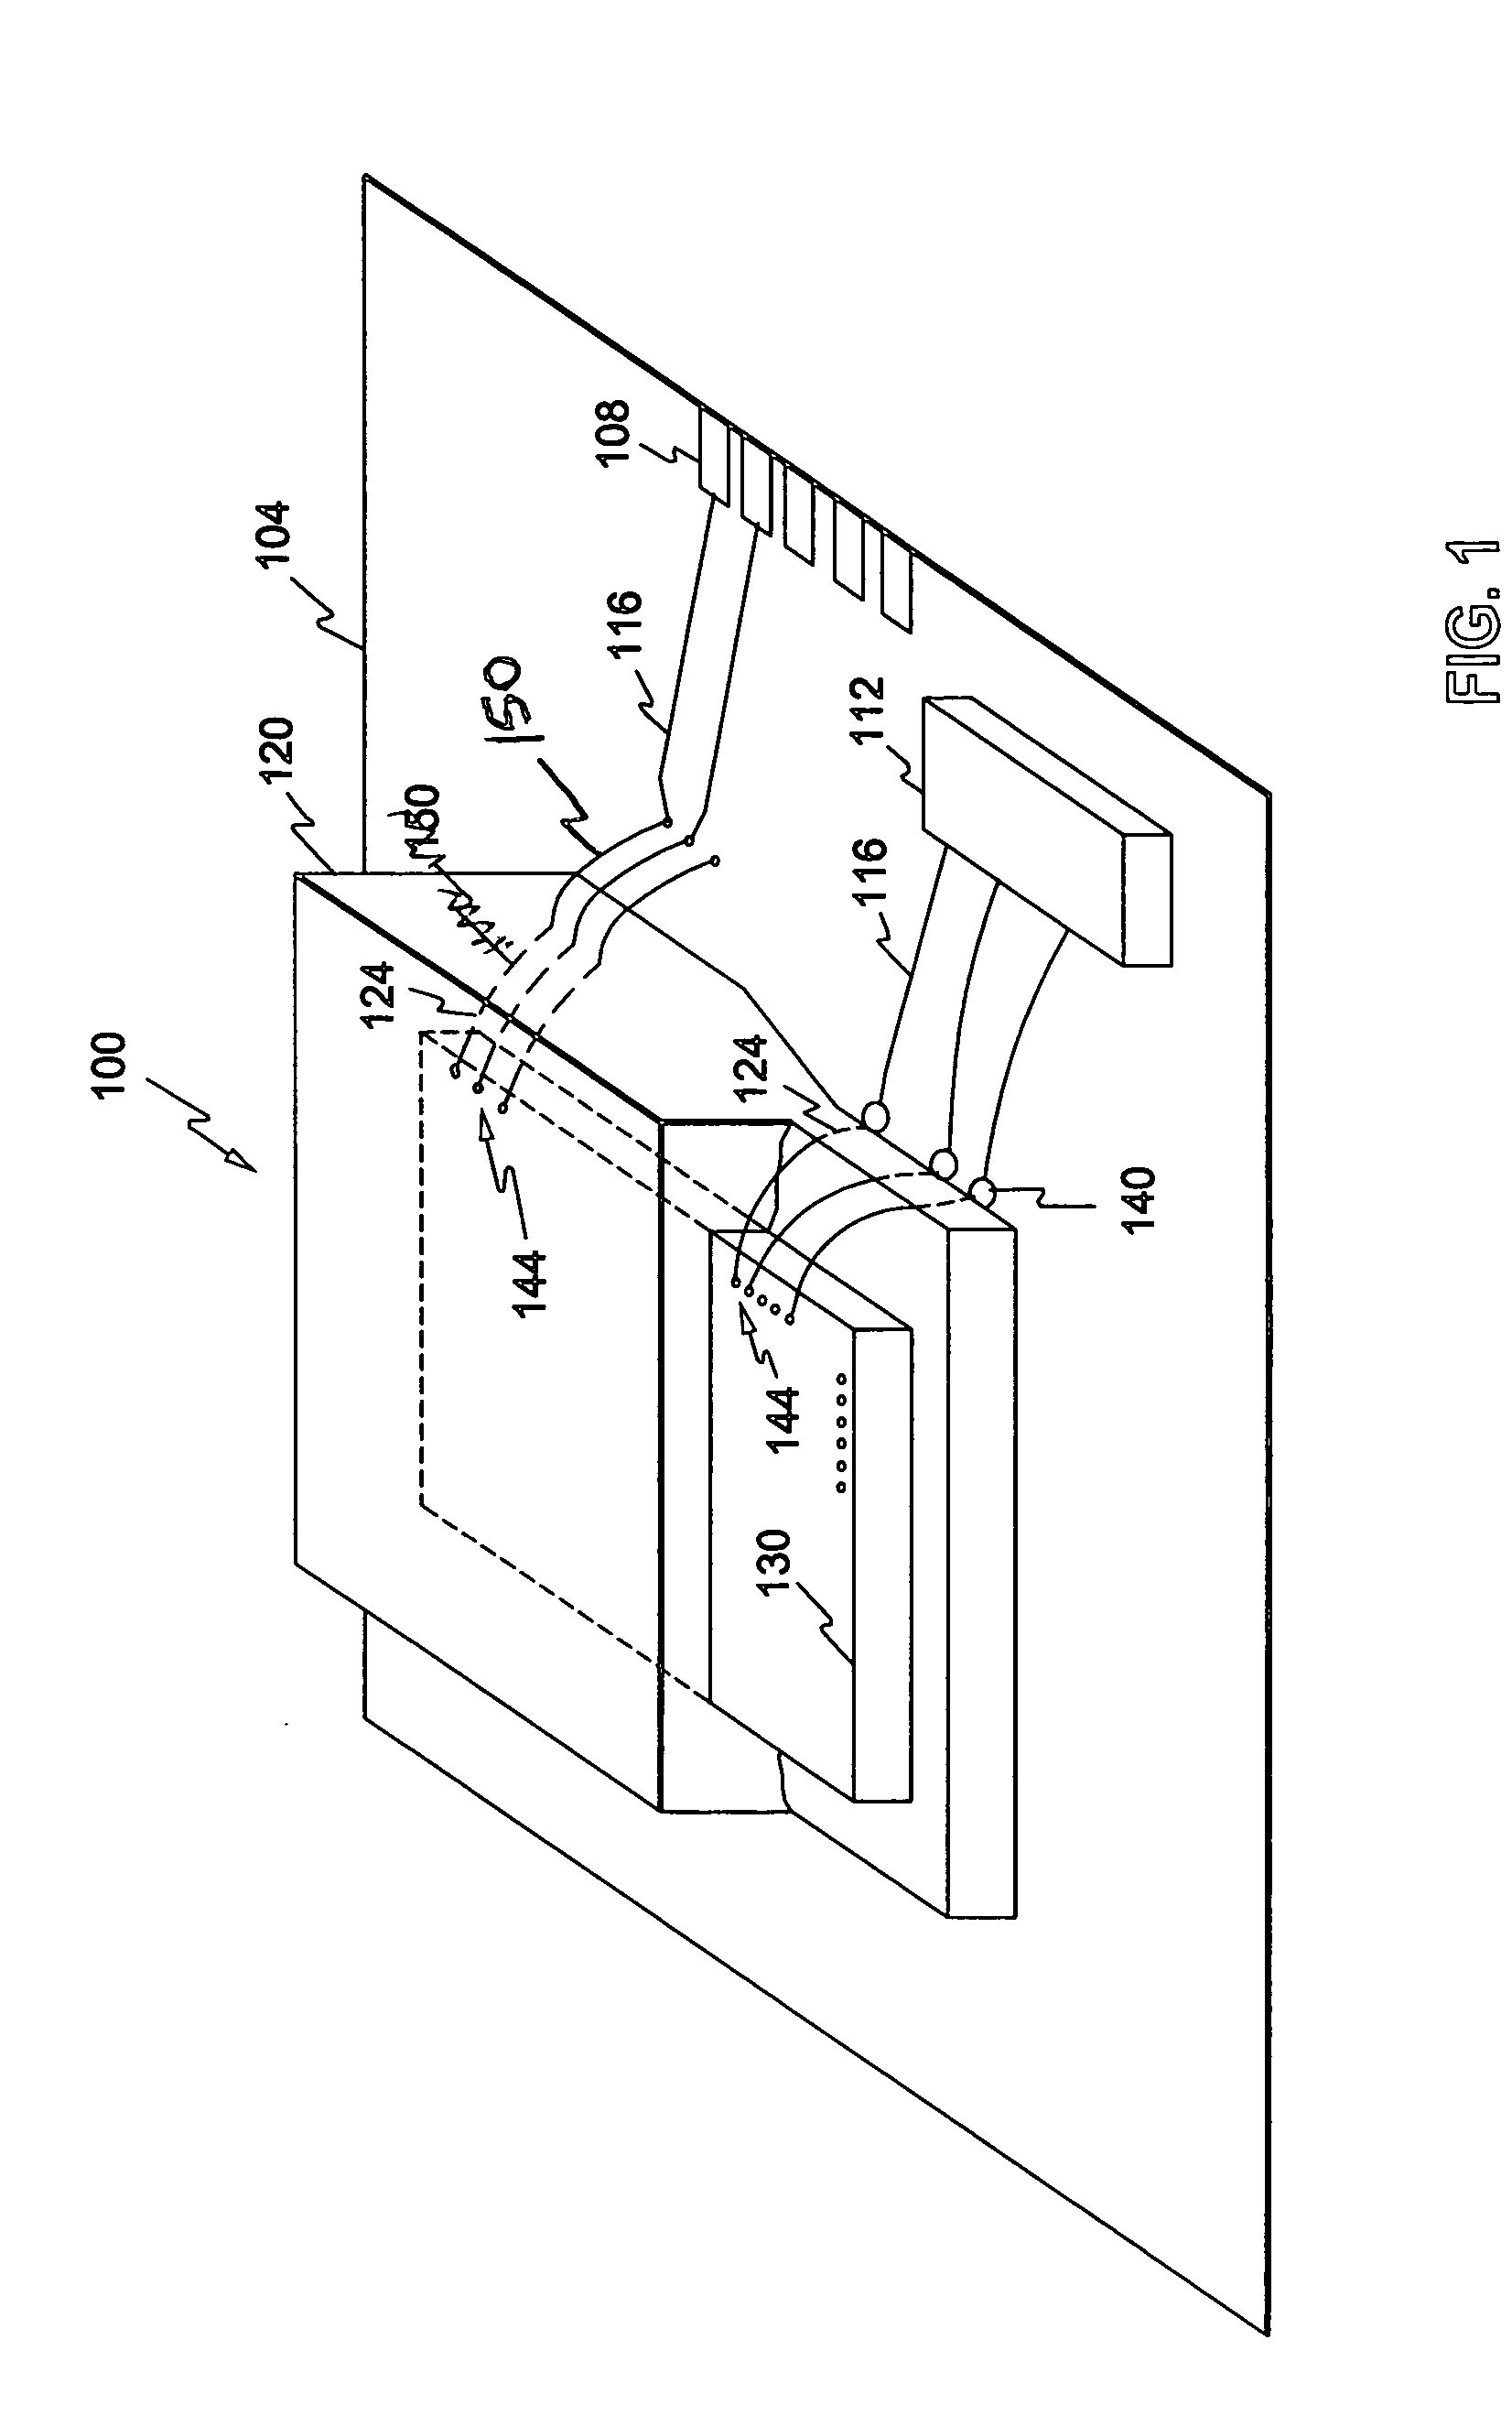 Method and apparatus for package testing